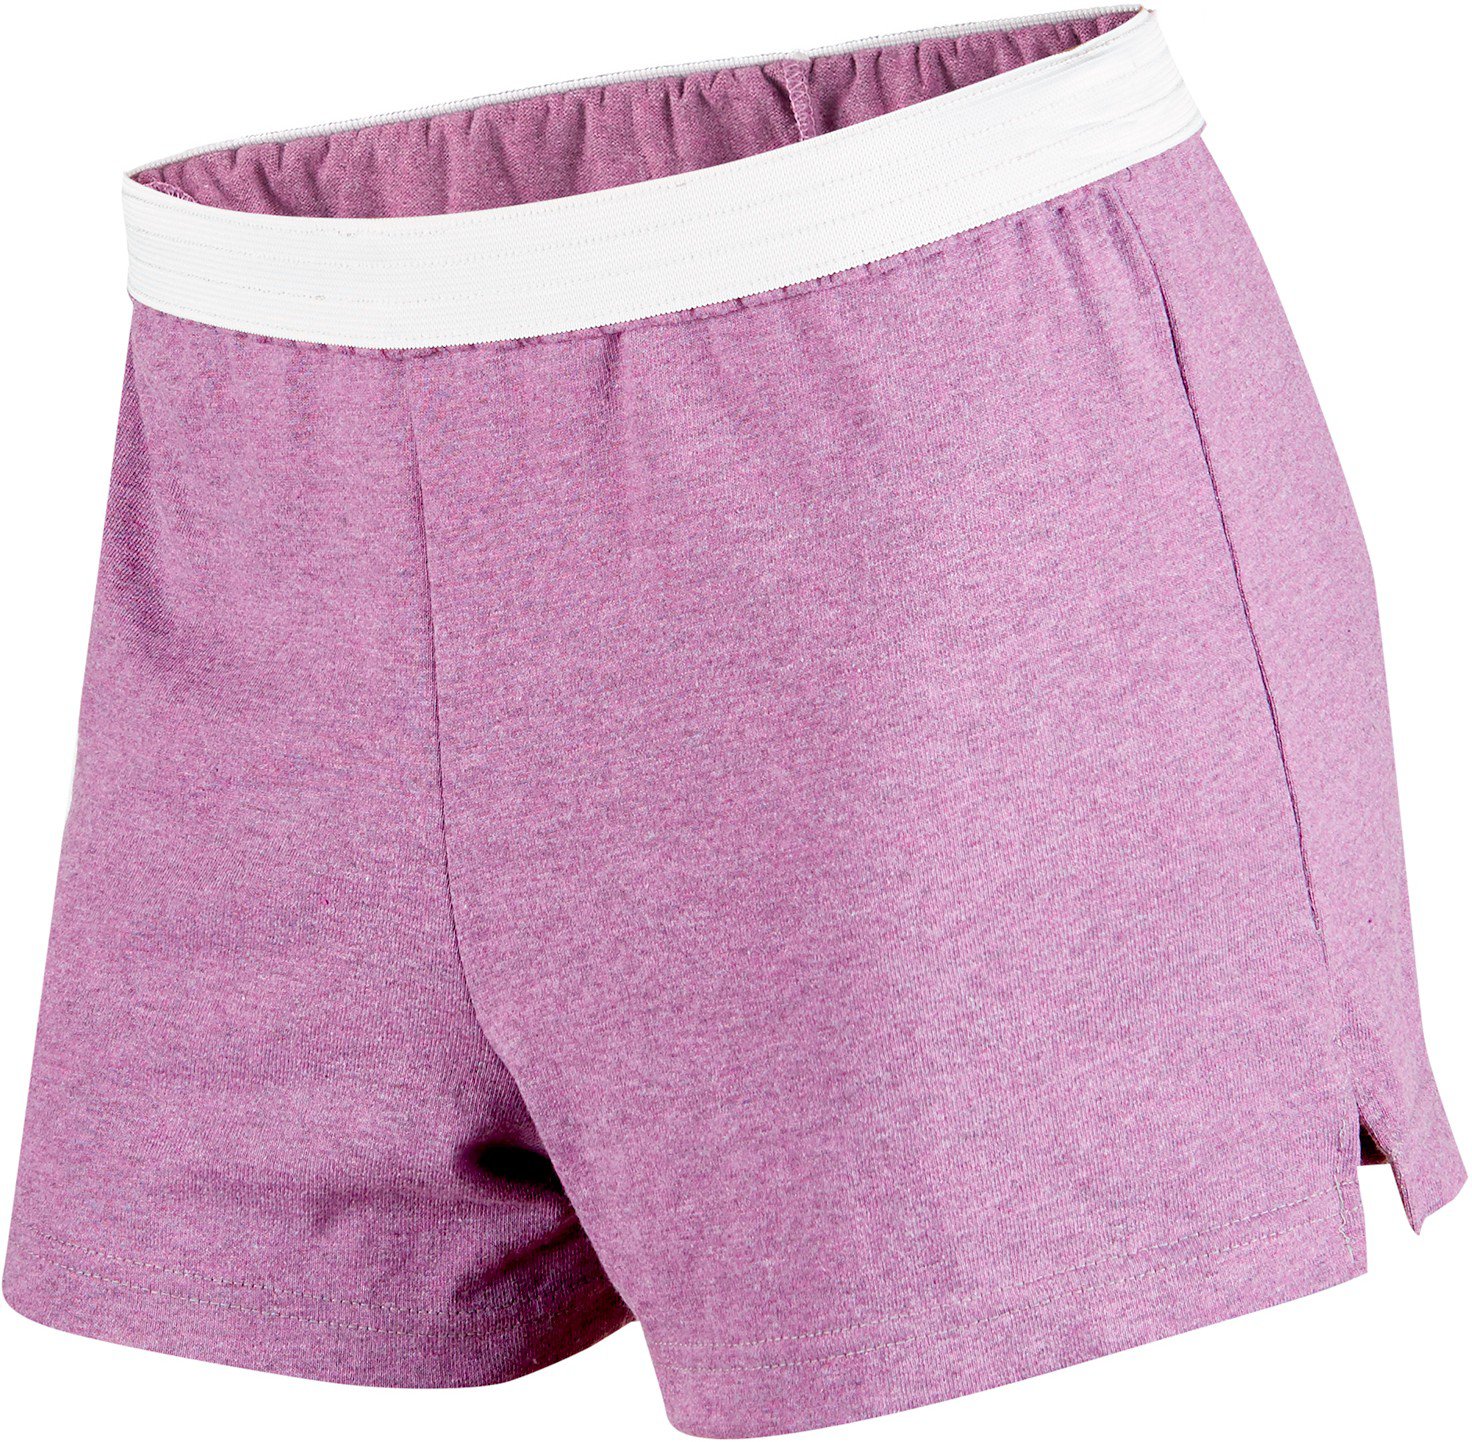 Soffe Juniors' Authentic Athletic Performance Short | Academy